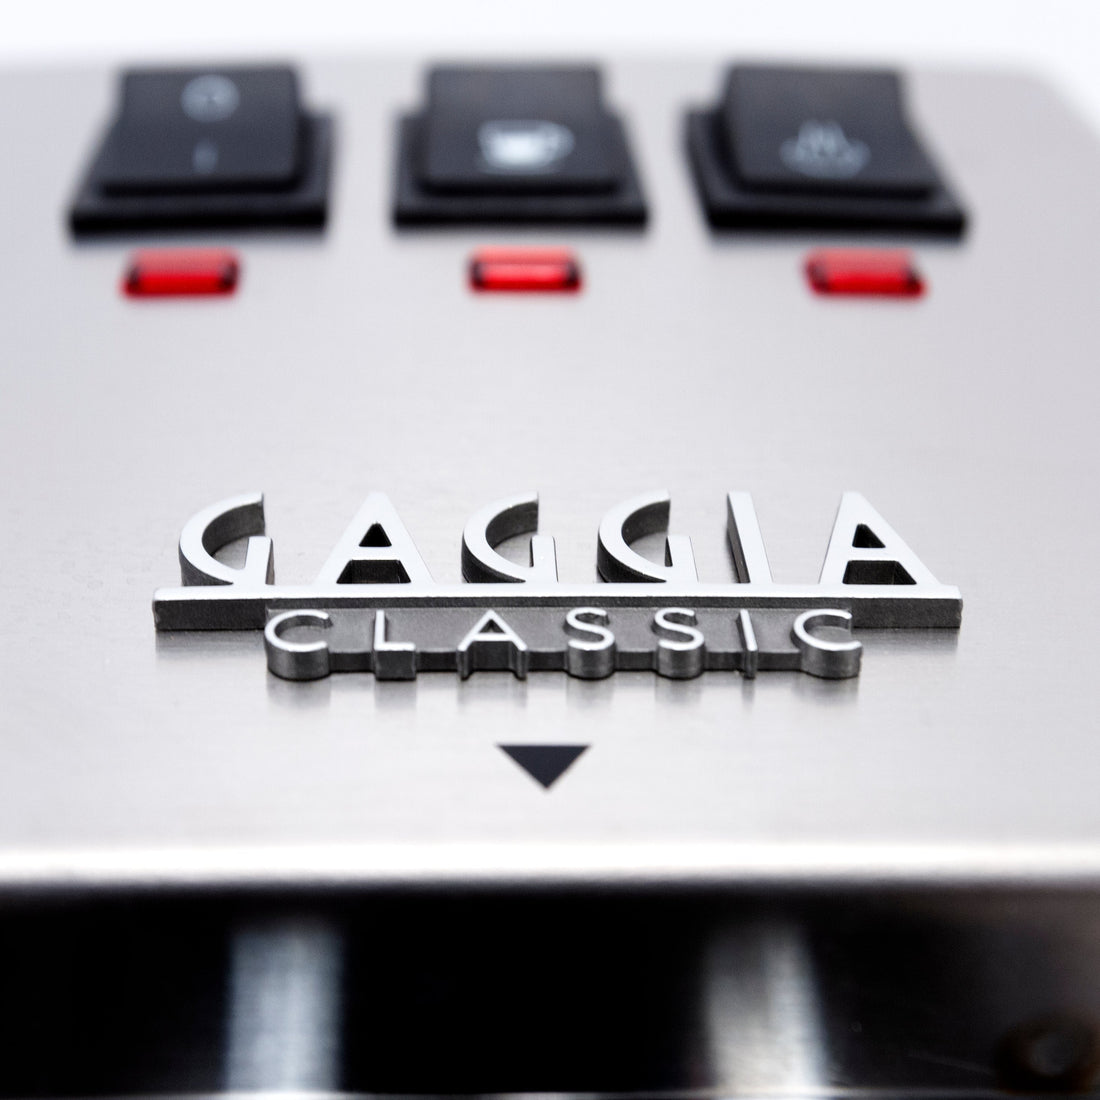 Gaggia Classic Pro in Stainless Steel - Wenge